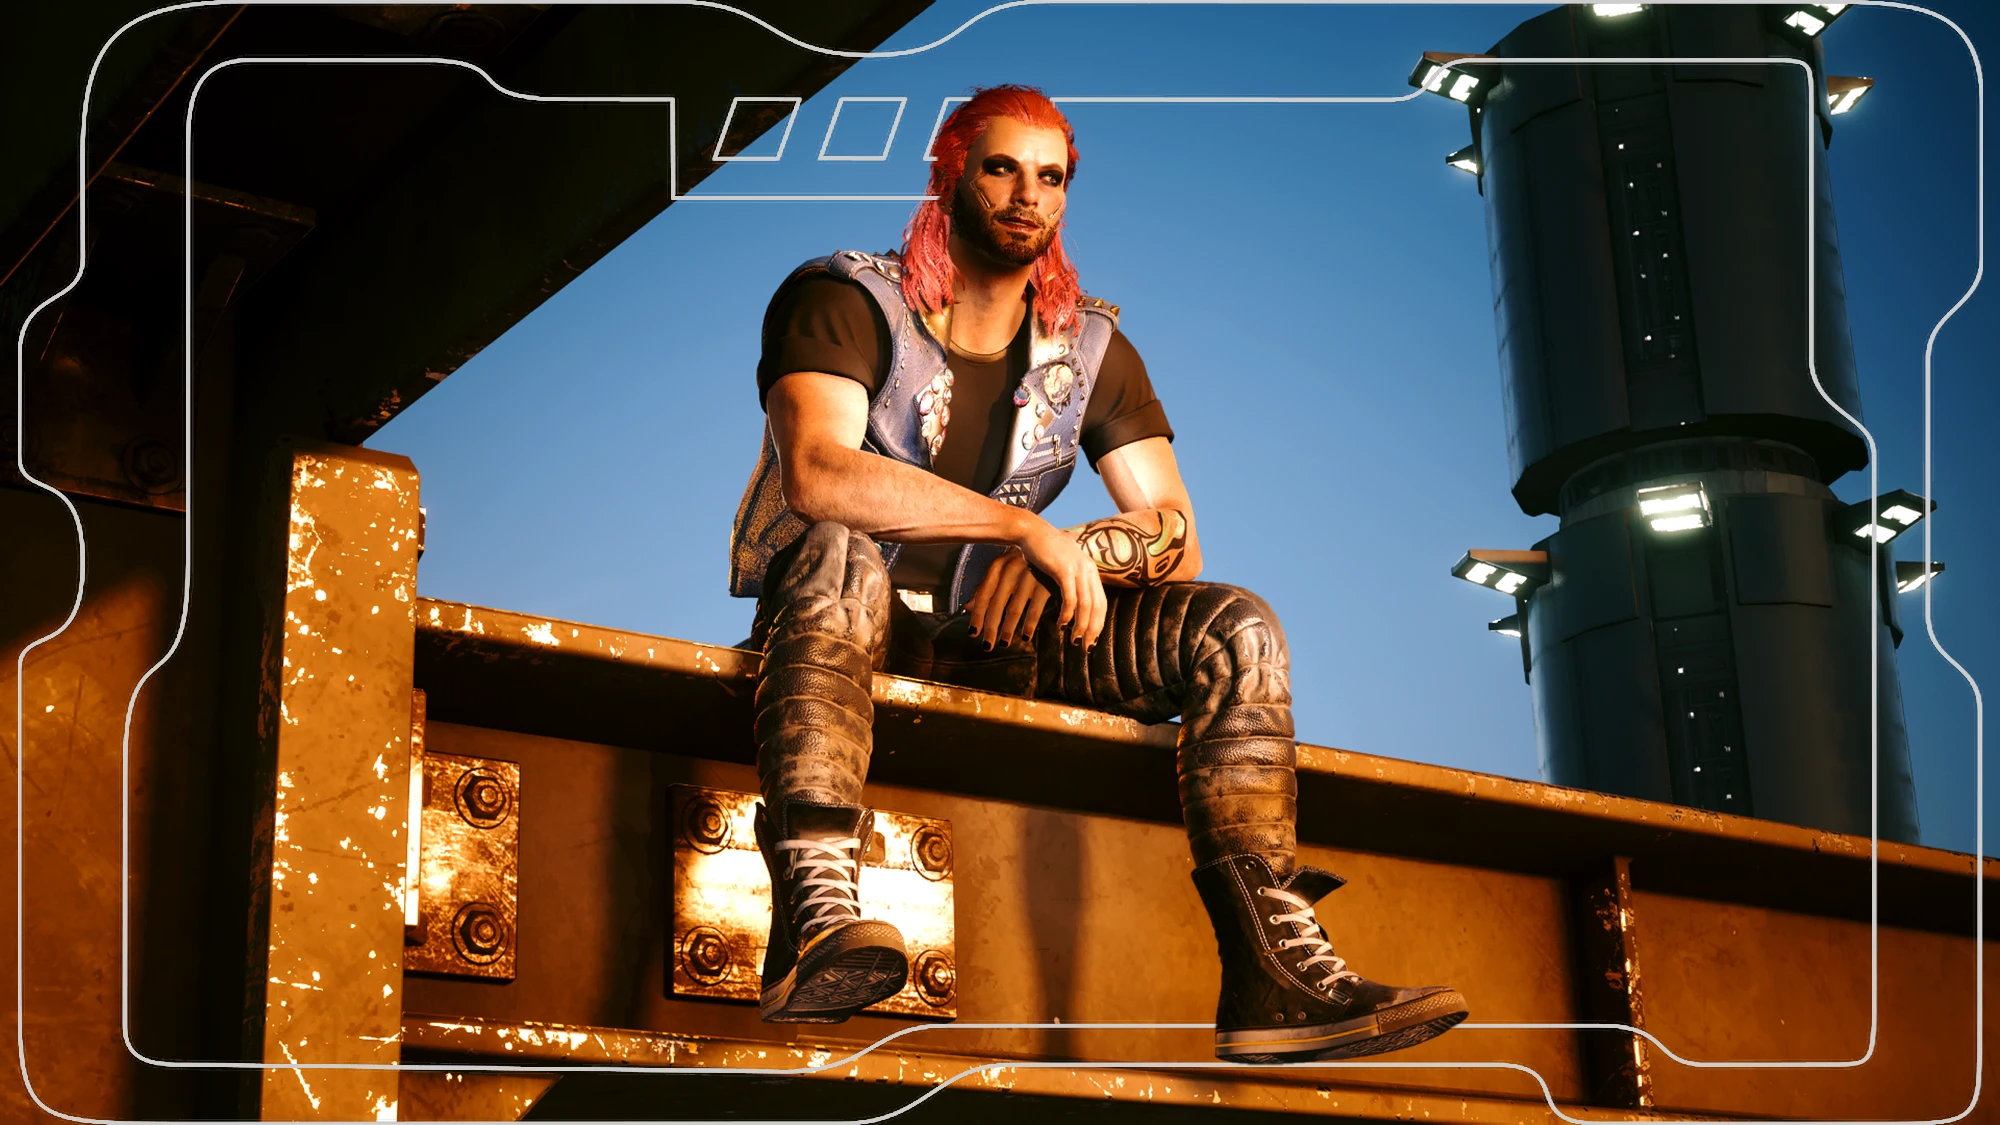 Wallpaper asphalt the city cracked fire hat smoke sneakers home  tattoo the car chain guy grin Sucker Punch inFamous Second Son Delsin  Rowe images for desktop section игры  download